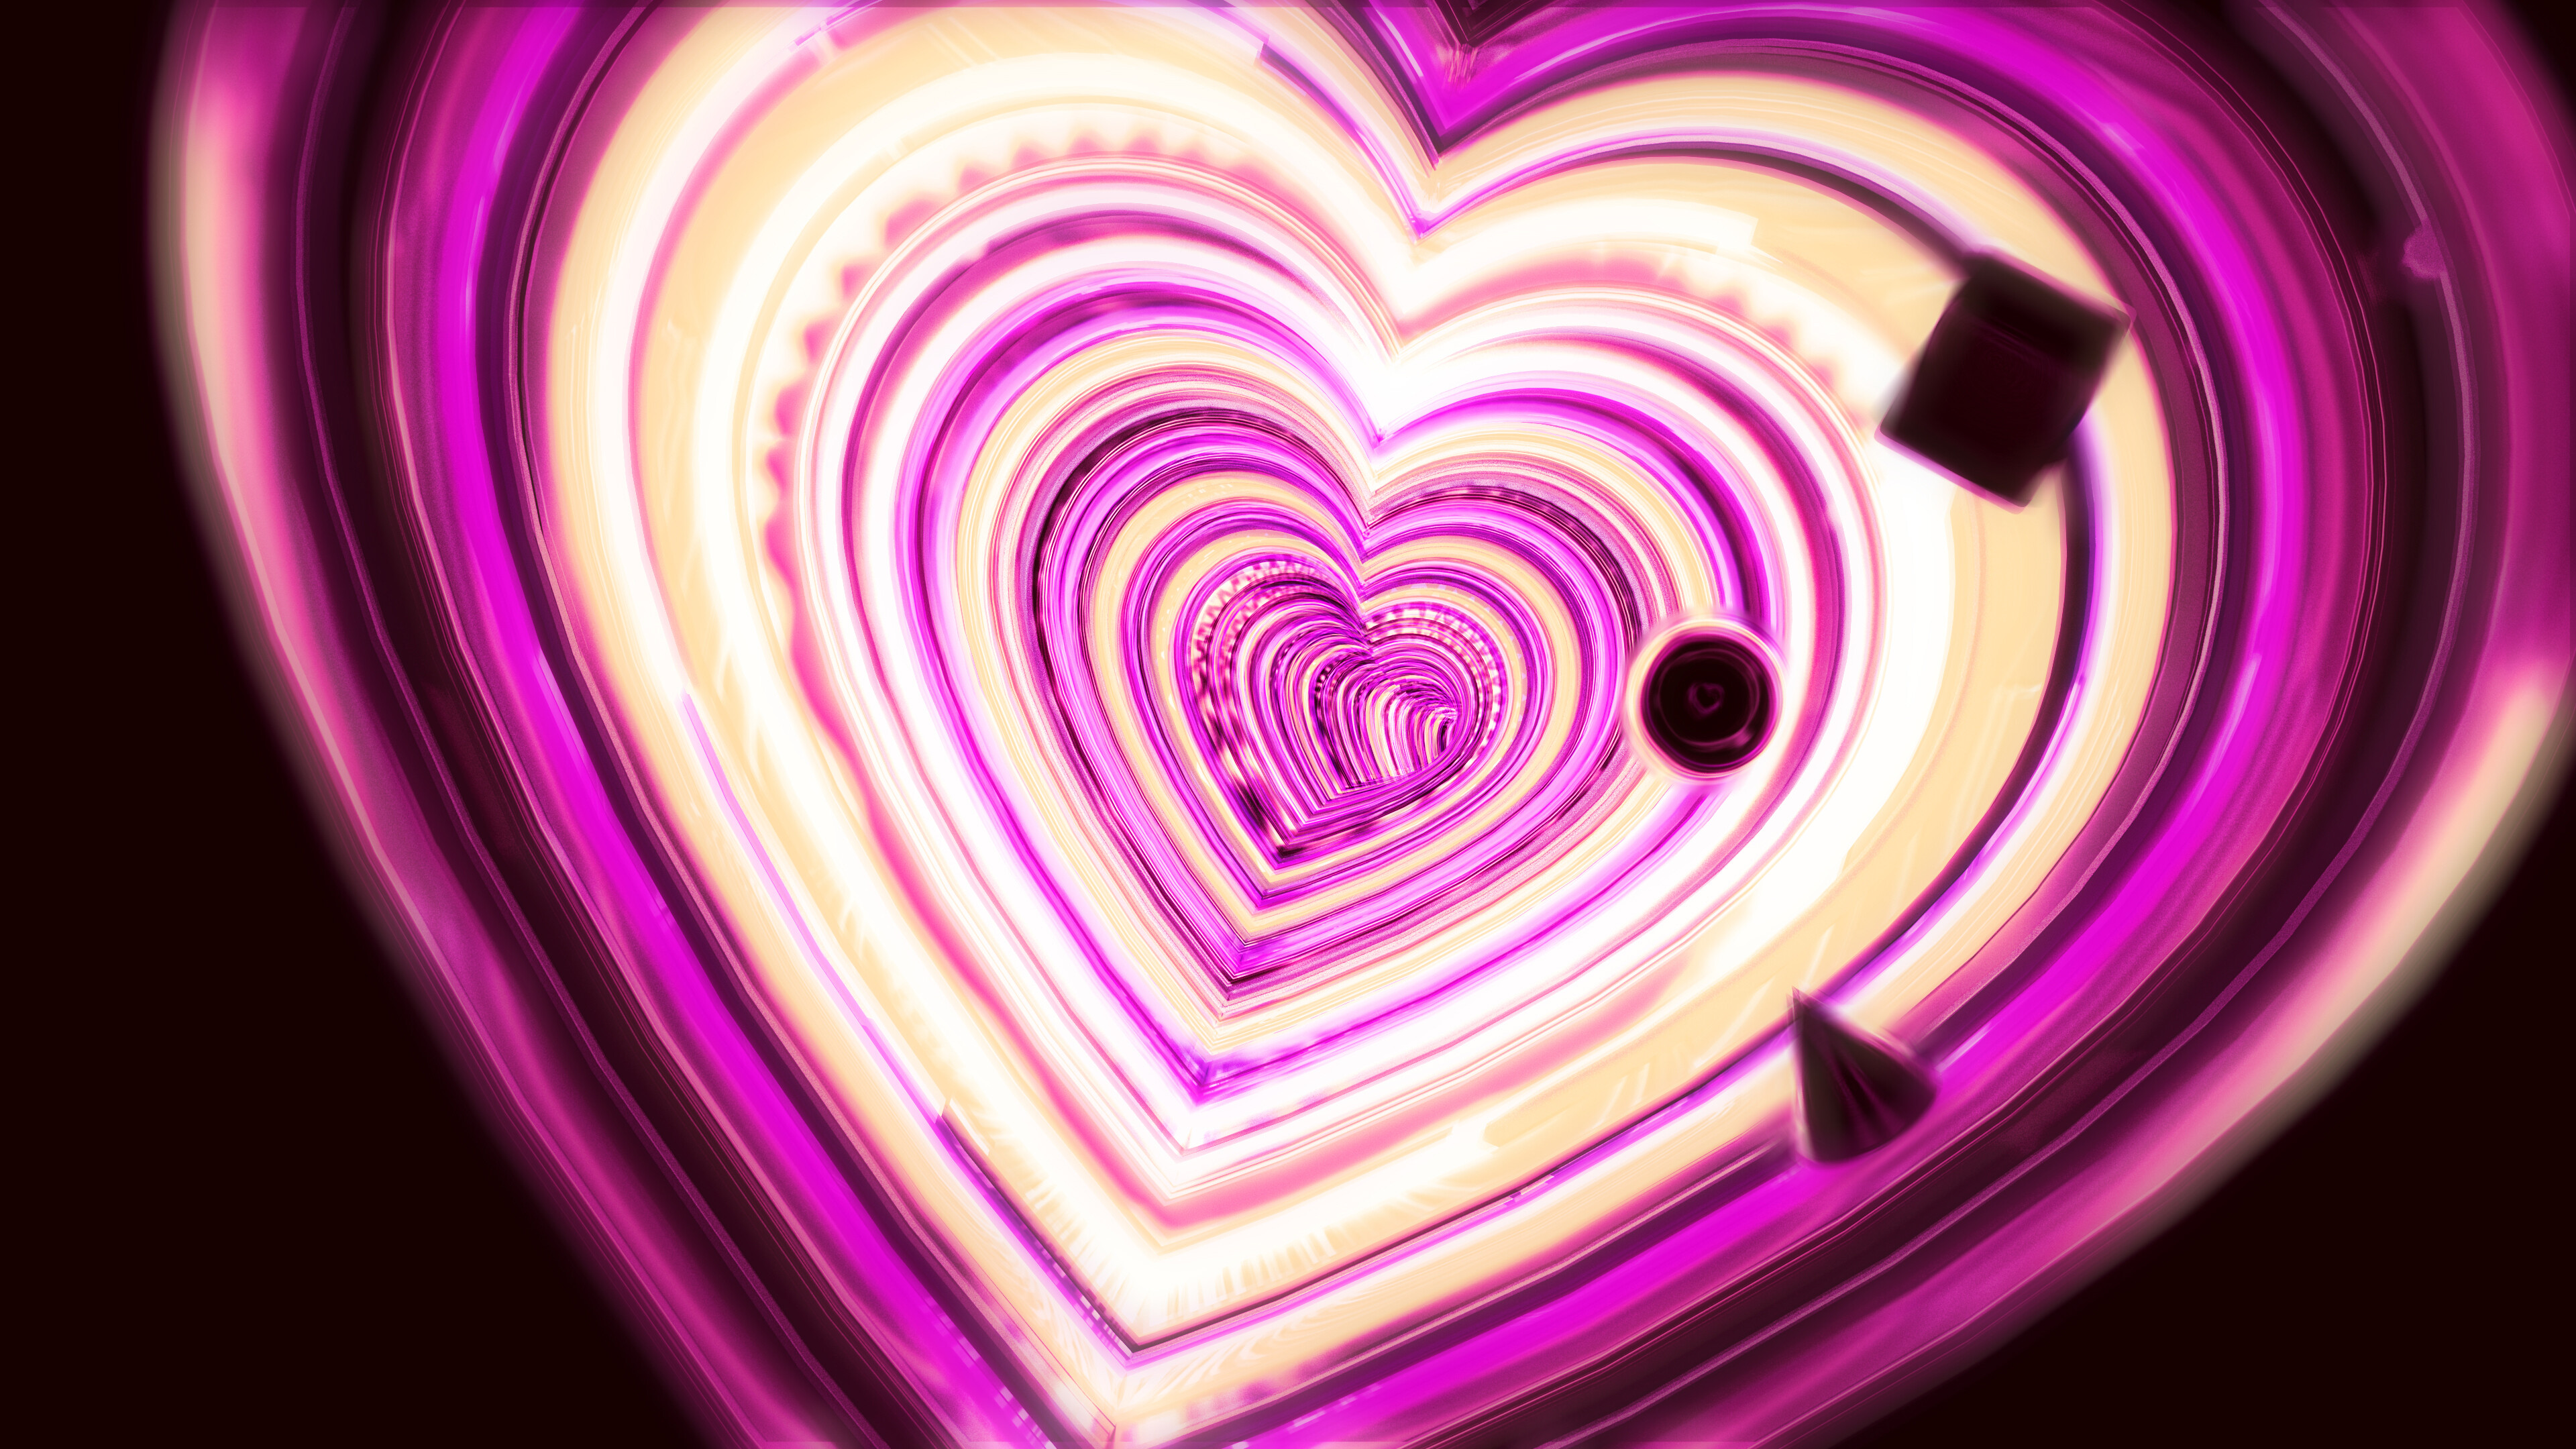 Heart: A sign of affection, Neon, Chocolate. 3840x2160 4K Wallpaper.